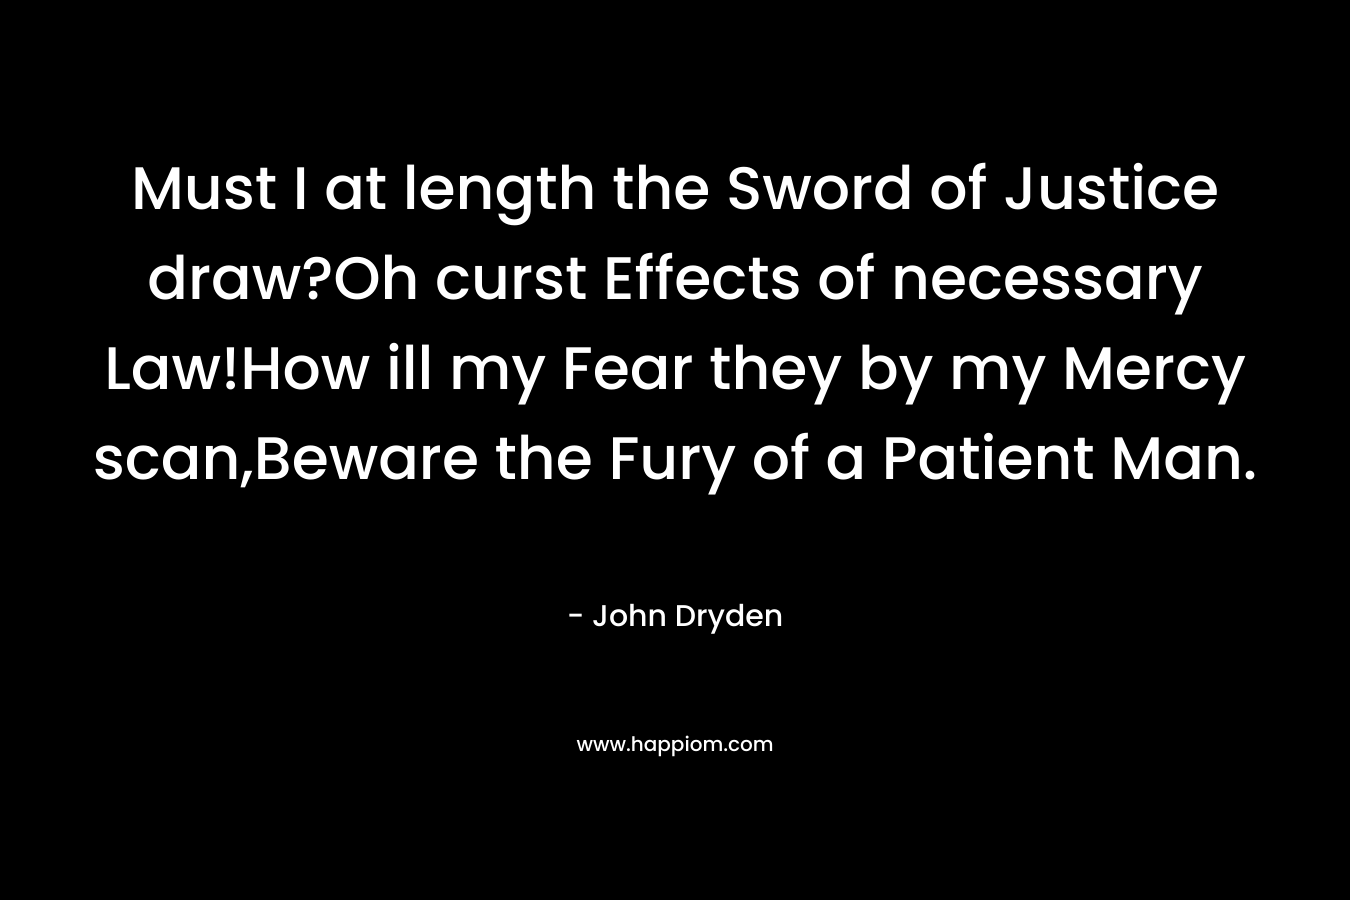 Must I at length the Sword of Justice draw?Oh curst Effects of necessary Law!How ill my Fear they by my Mercy scan,Beware the Fury of a Patient Man.